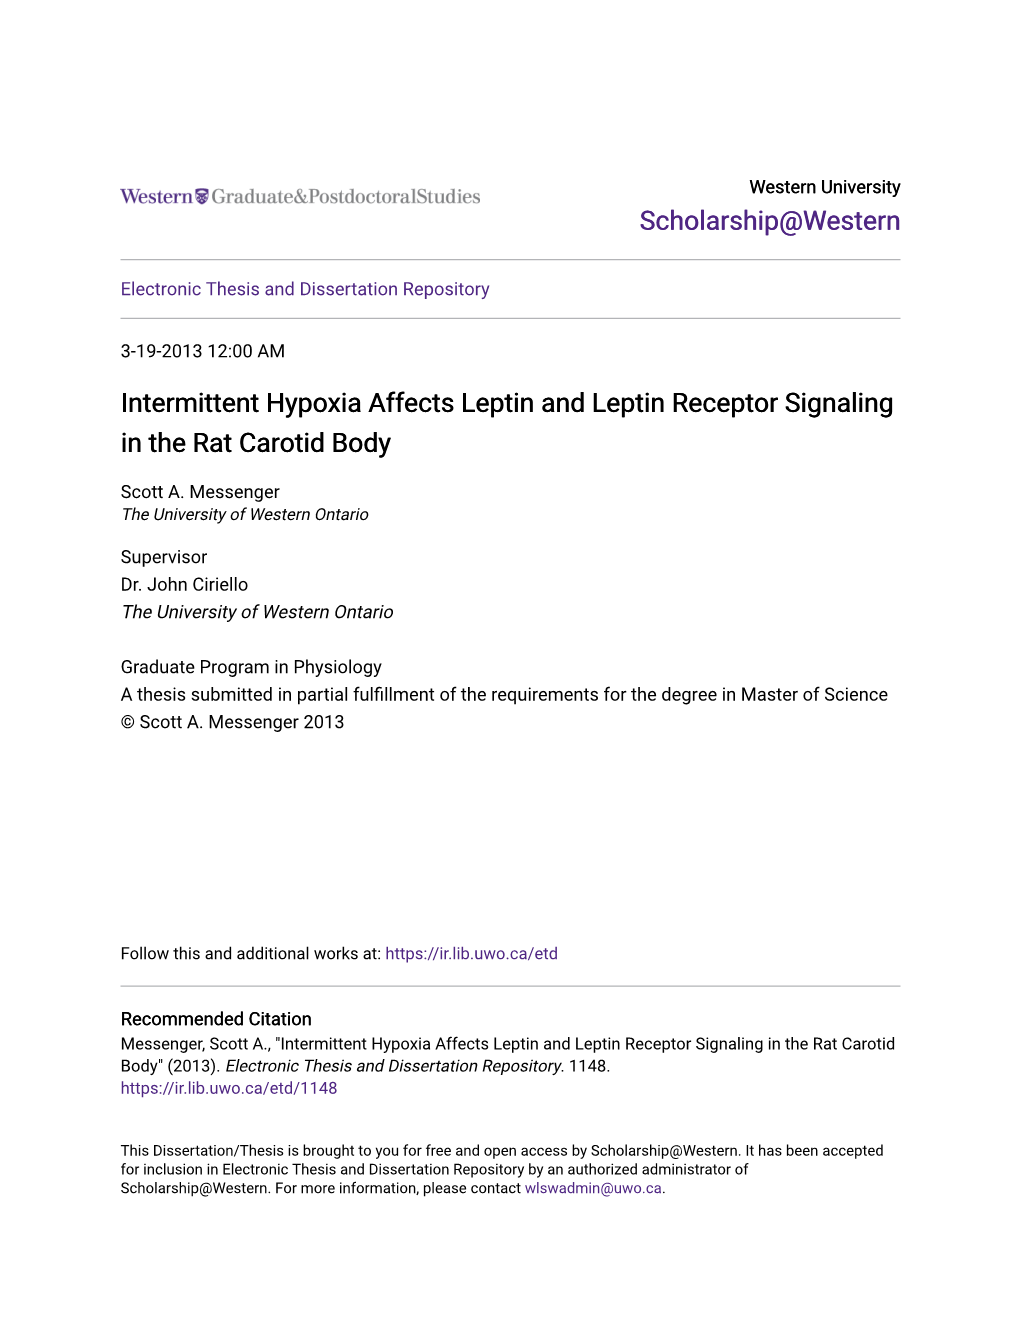 Intermittent Hypoxia Affects Leptin and Leptin Receptor Signaling in the Rat Carotid Body